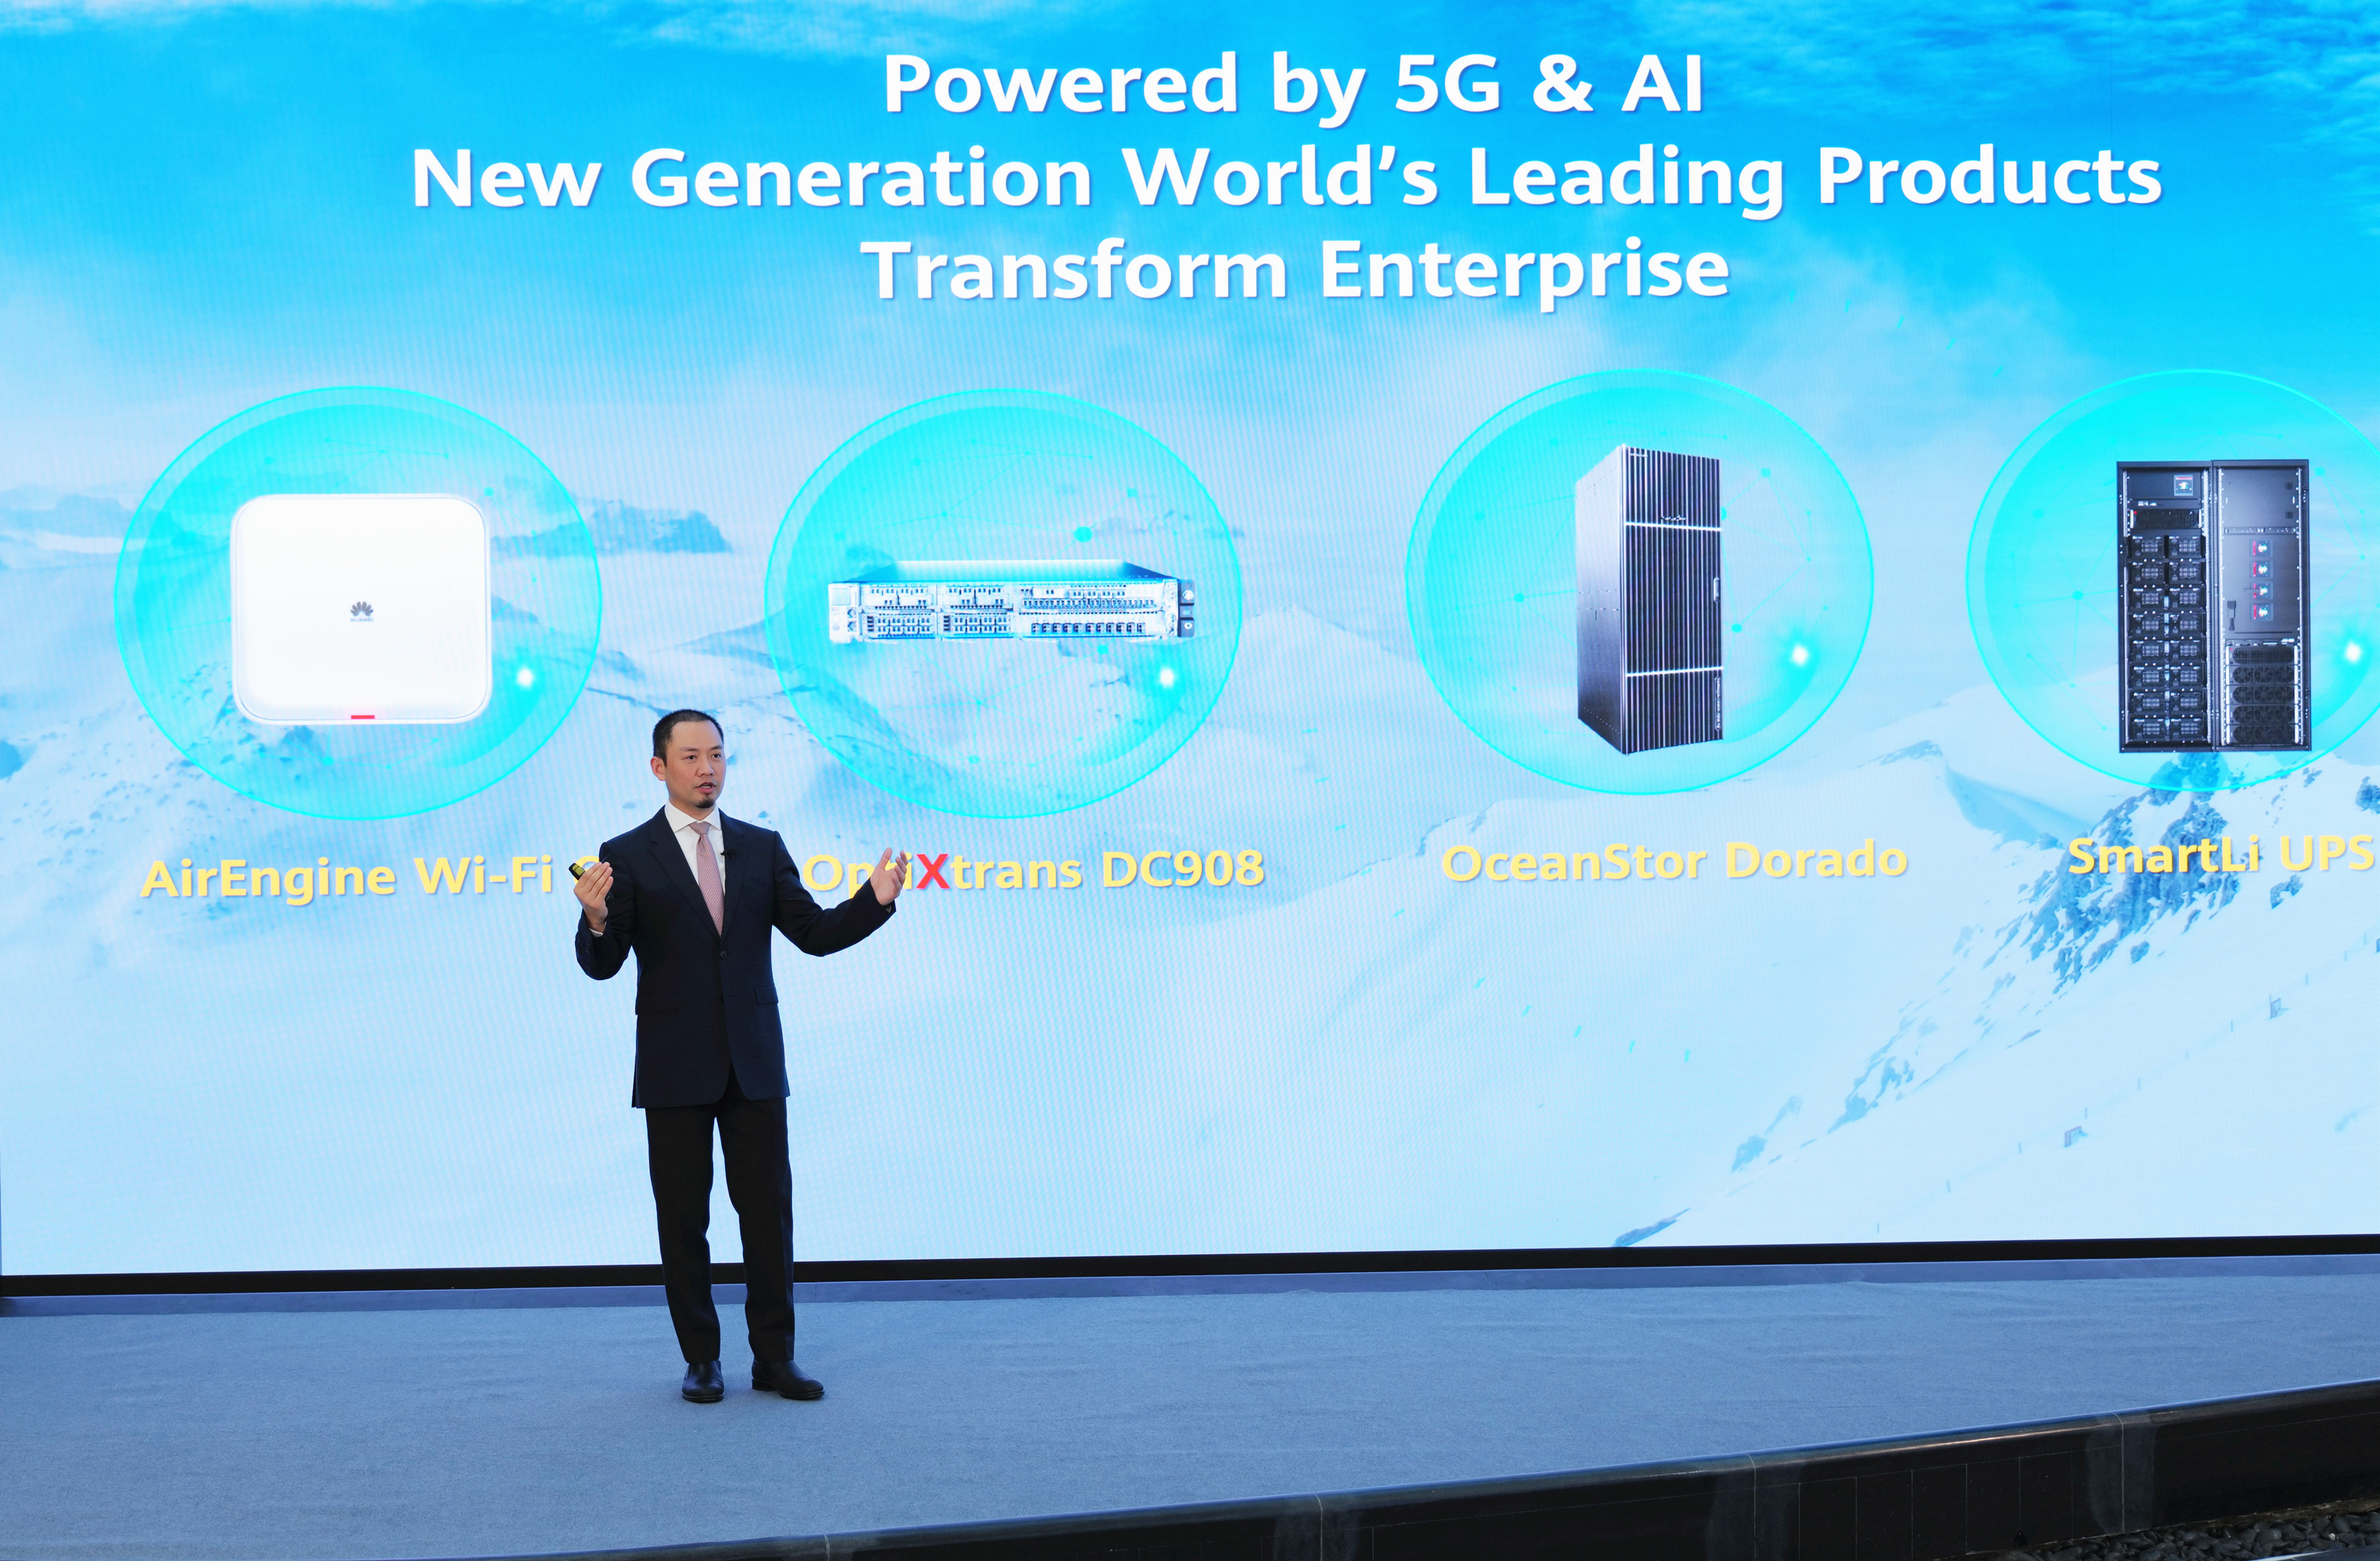 Qiu Heng, President of Global Marketing, Huawei Enterprise, at the launch of OptiXtrans DC908 and AirEngine Wi-Fi 6